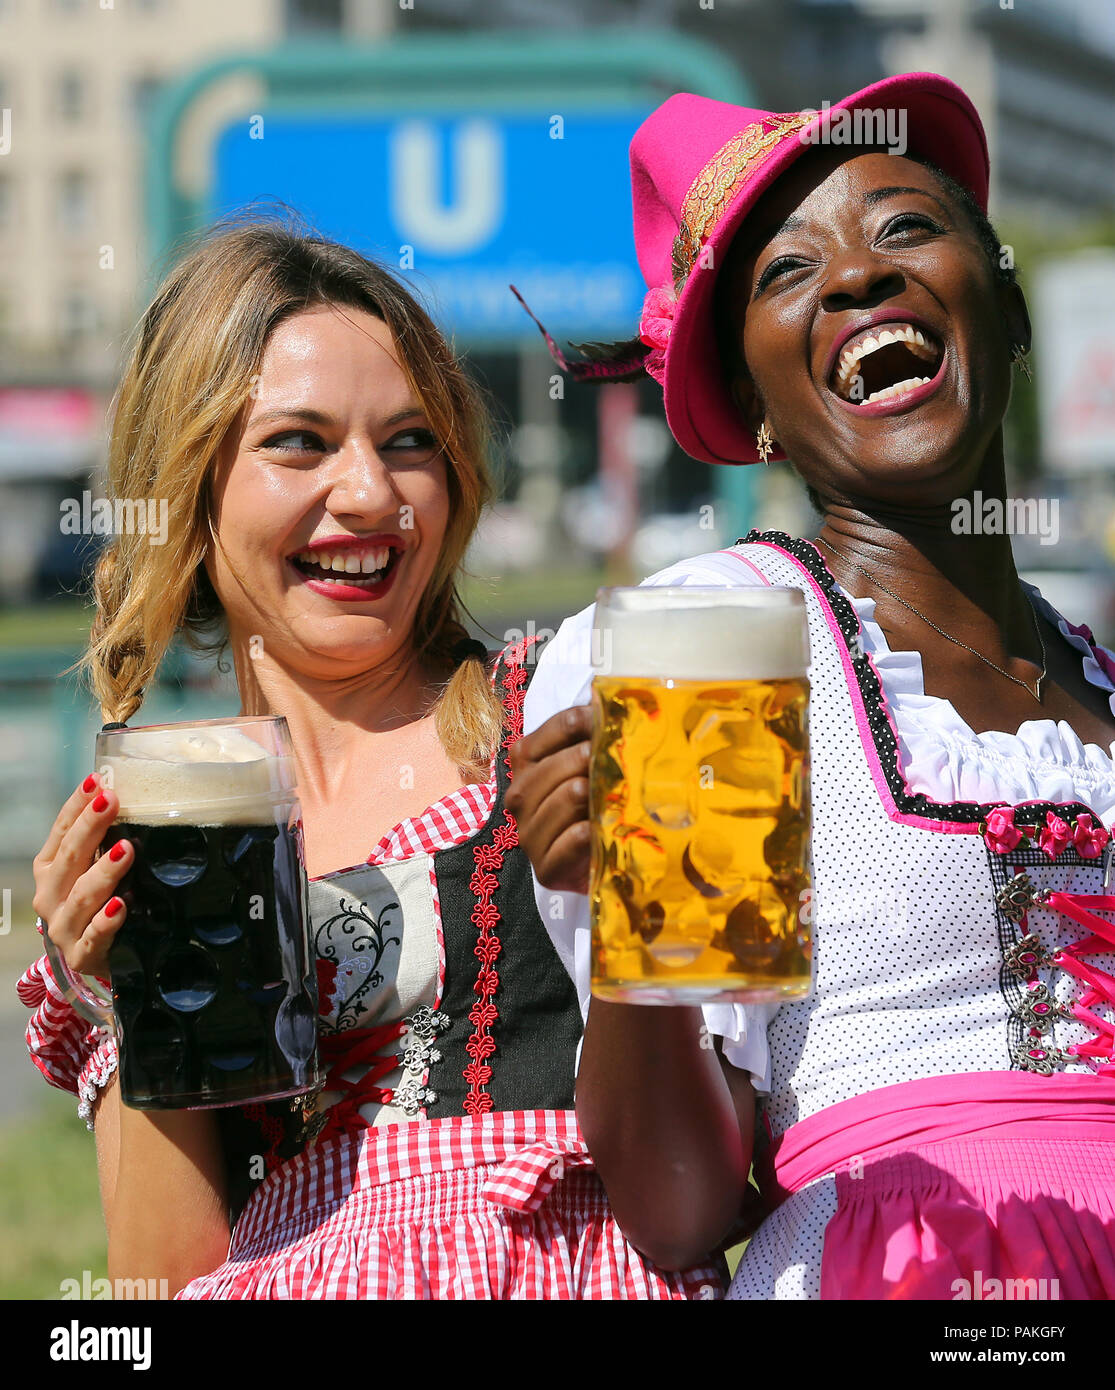 Berlin, Germany. 24th July, 2018. Models Ayanna (r) and Jacquline present draught beer during a photo shoot for the 22nd International Berlin Beer Festival on Karl-Marx-Allee in the district of Friedrichshain-Kreuzberg. The beer festival will take place from 03 to 05 August 2018, between Frankfurter Tor and Strausberger Square. Credit: Wolfgang Kumm/dpa/Alamy Live News Stock Photo